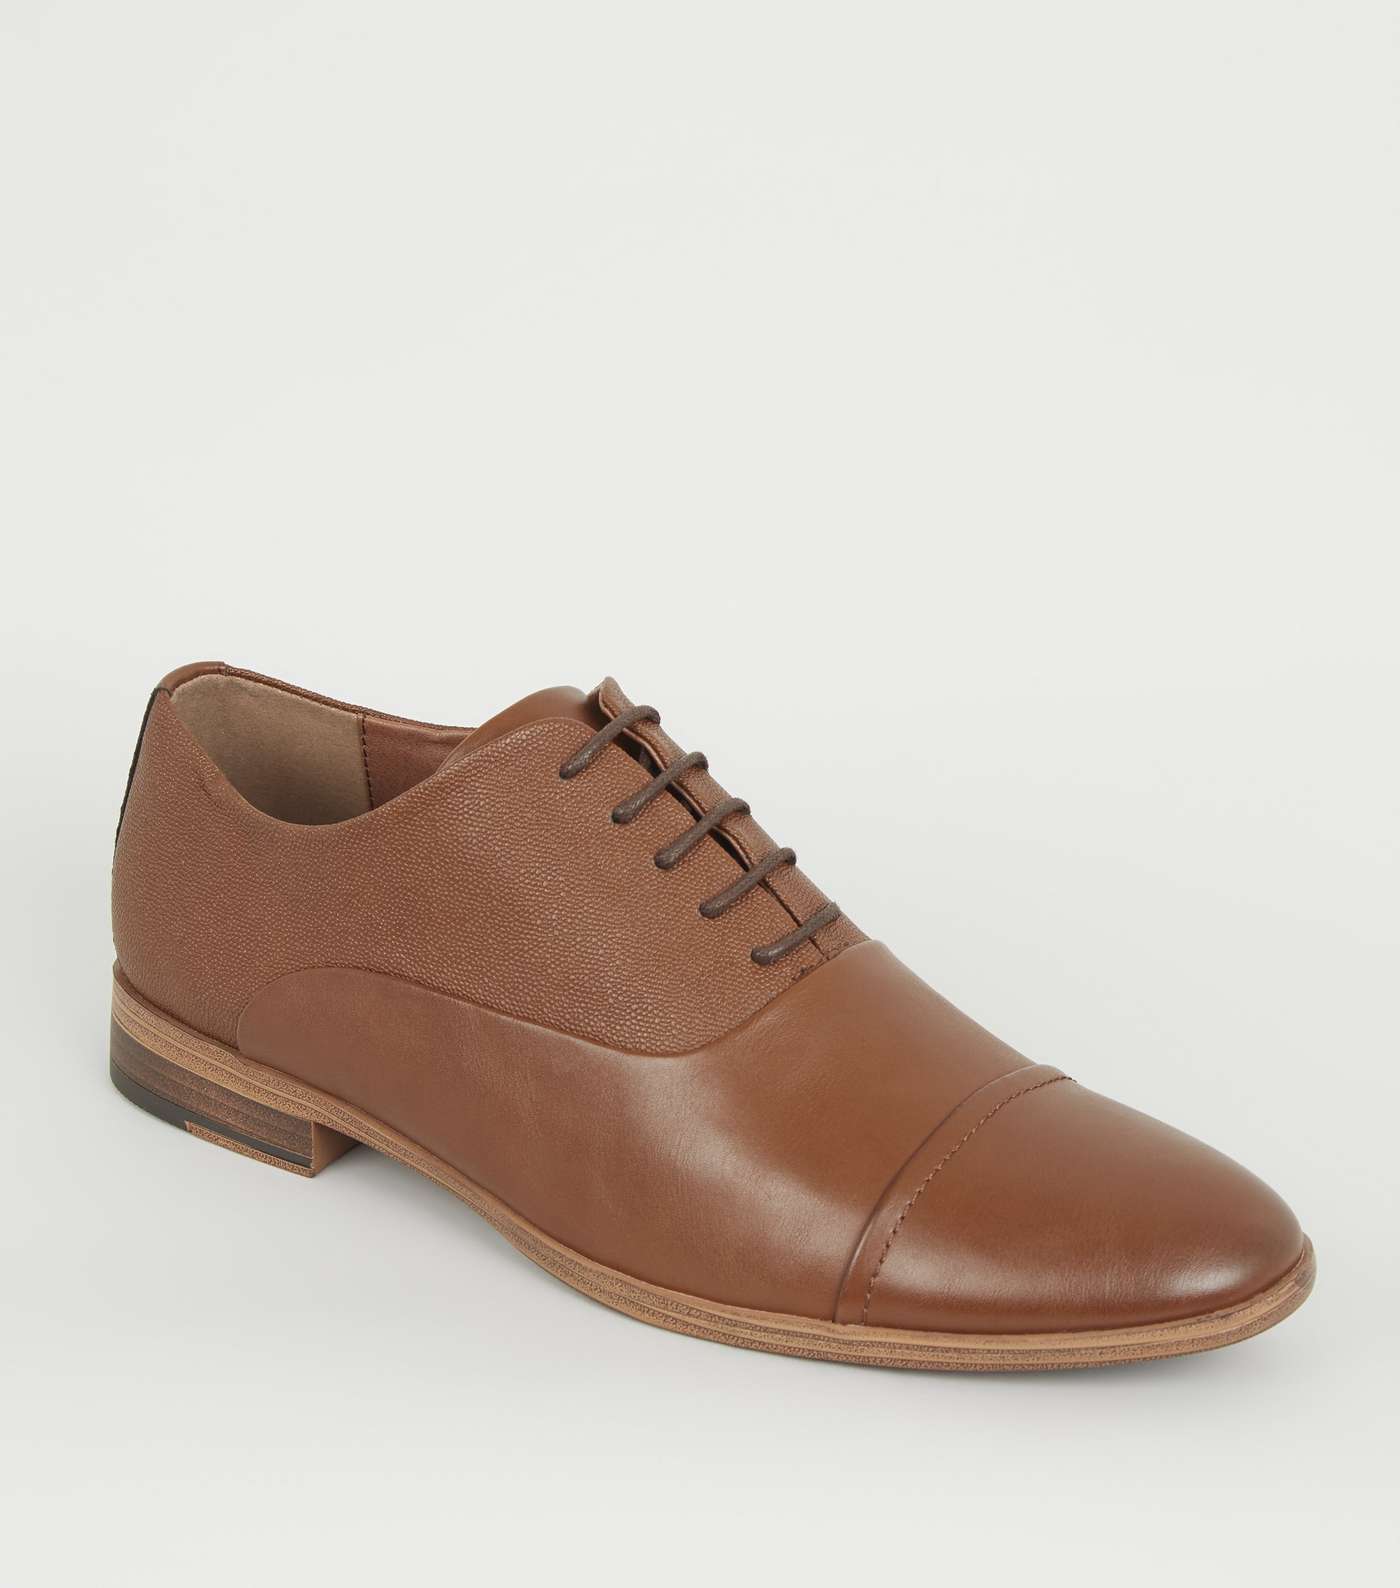 Tan Leather-Look Oxford Shoes Image 2